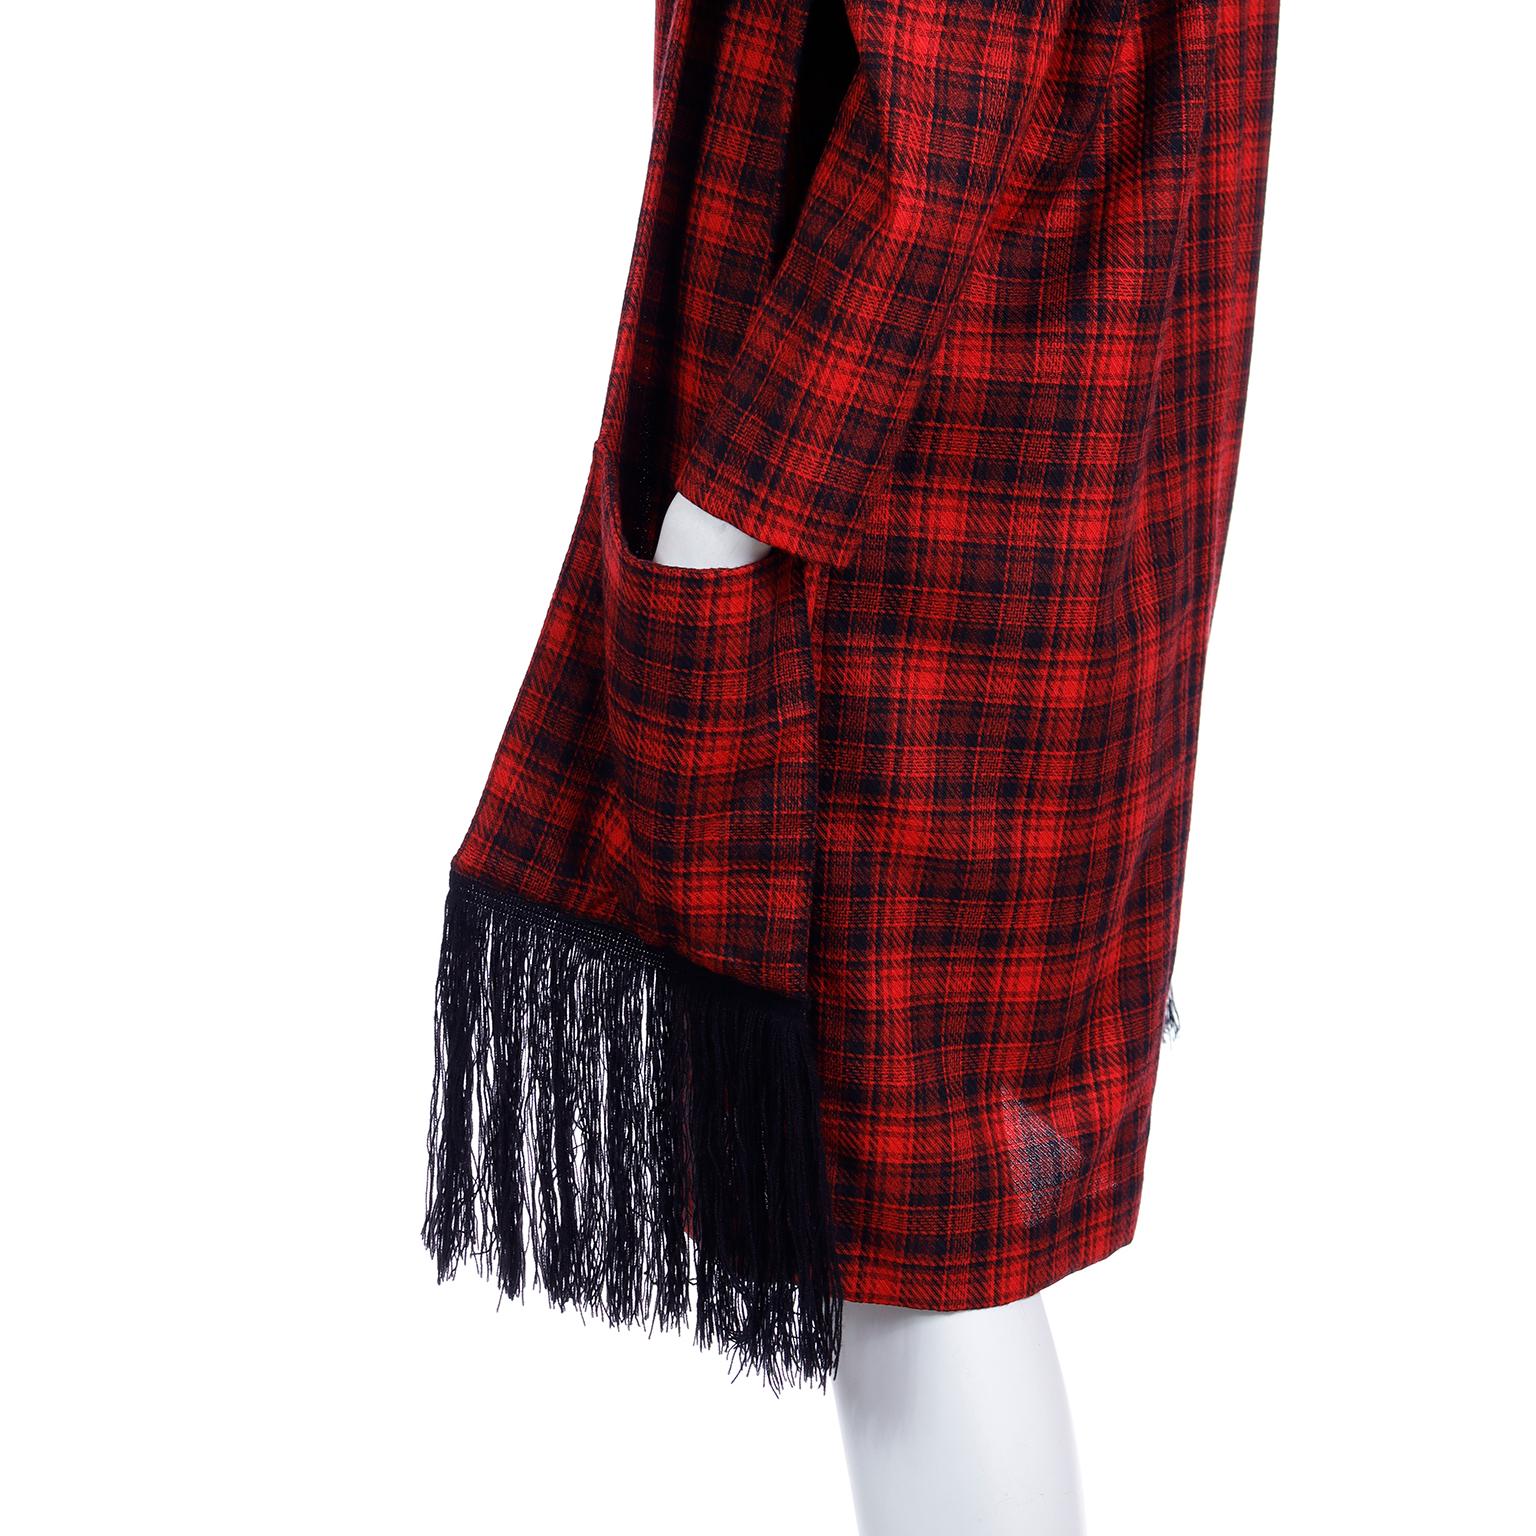 Pierre Cardin Vintage Red Plaid Dress With Long Scarf w Fringe & Pockets For Sale 5